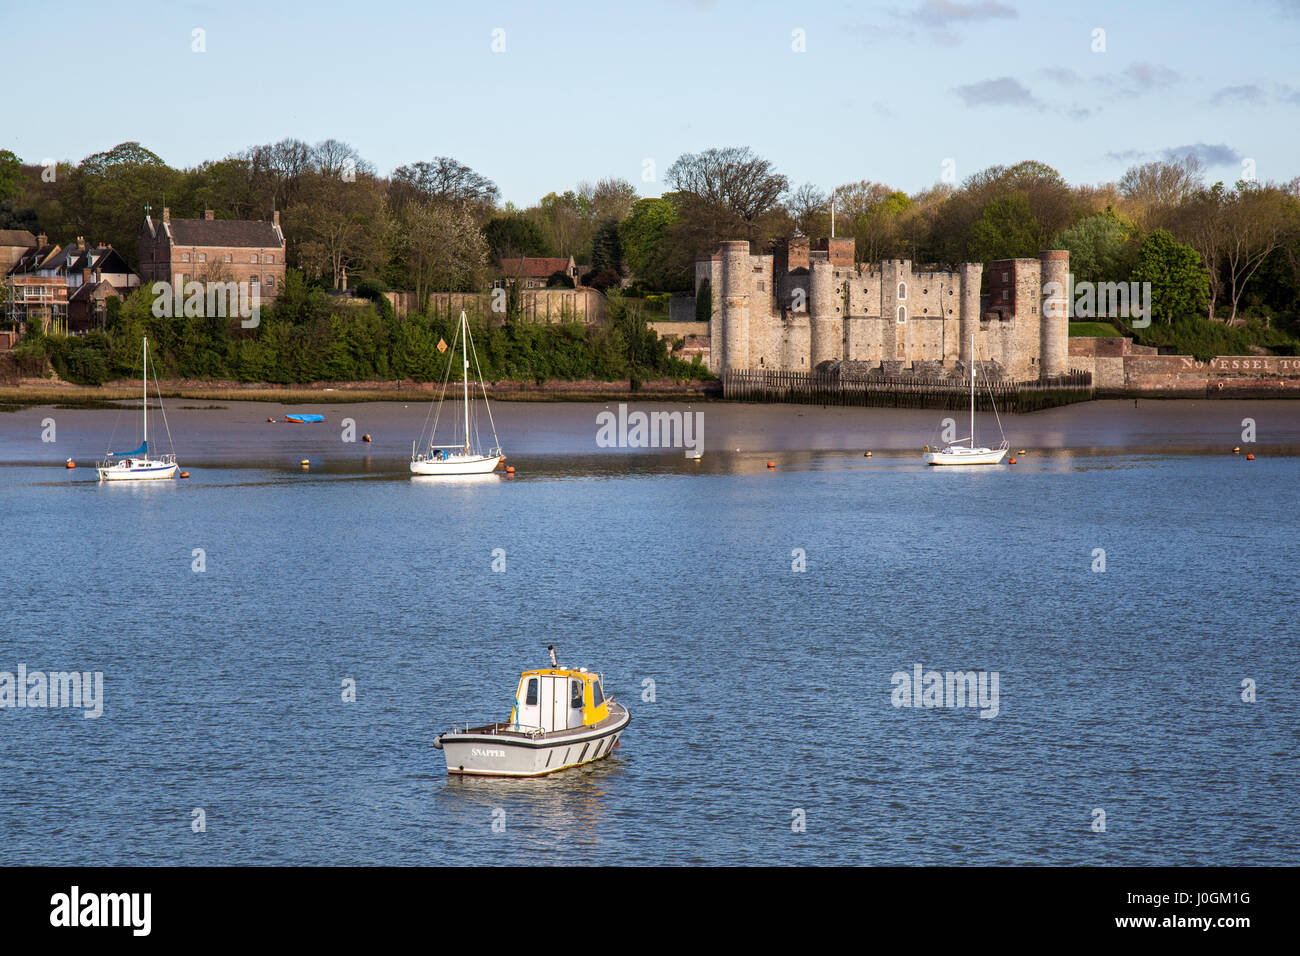 View from Chatham Maritime Marina in Kent, England, looking across the River Medway with Upnor Castle on the far bank. Stock Photo